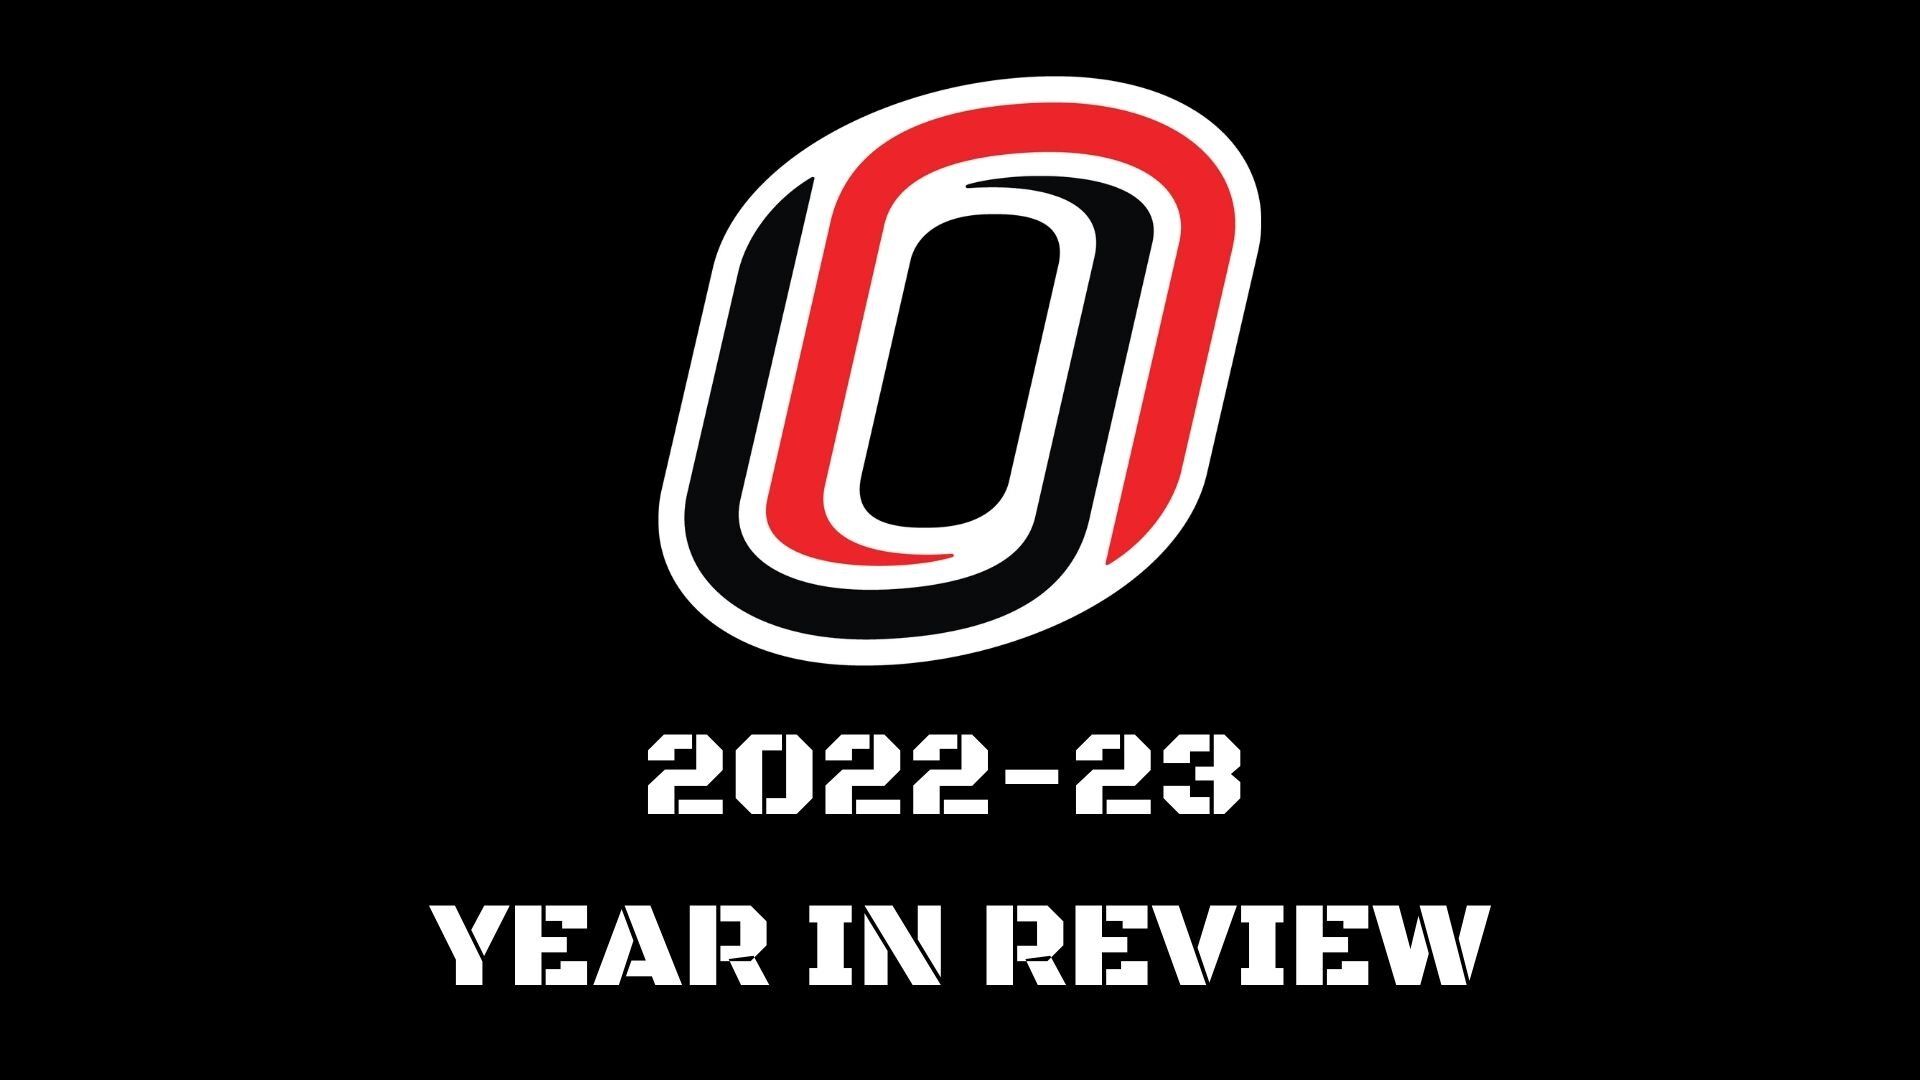 Omaha hockey notes Coach Mike Gabinet excited for 2023-24 season at NCHC media days